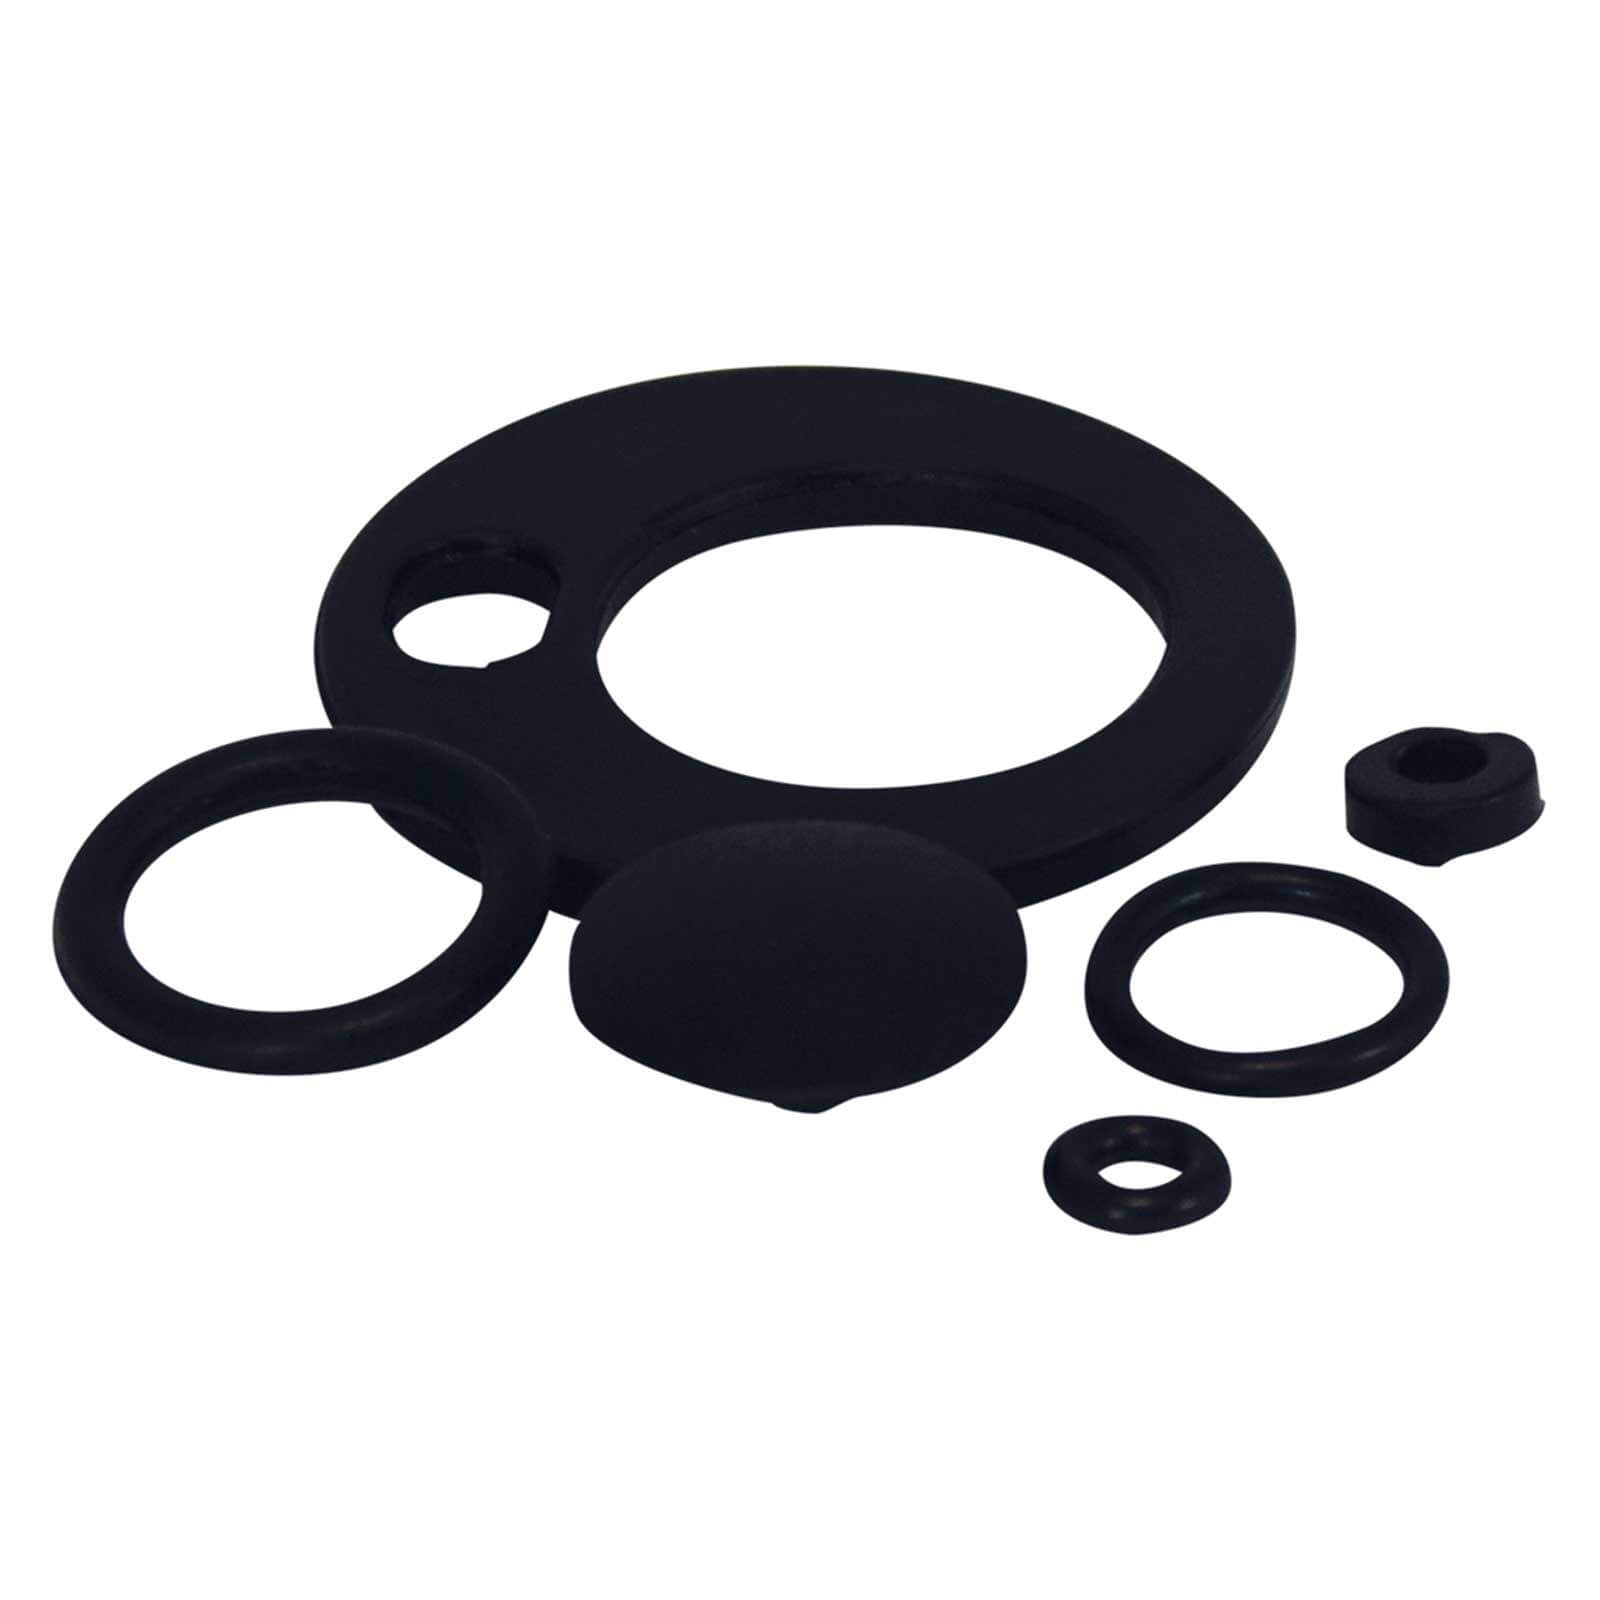 Spear and Jackson Replacement O Rings for 2l Pump Action Pressure Sprayers